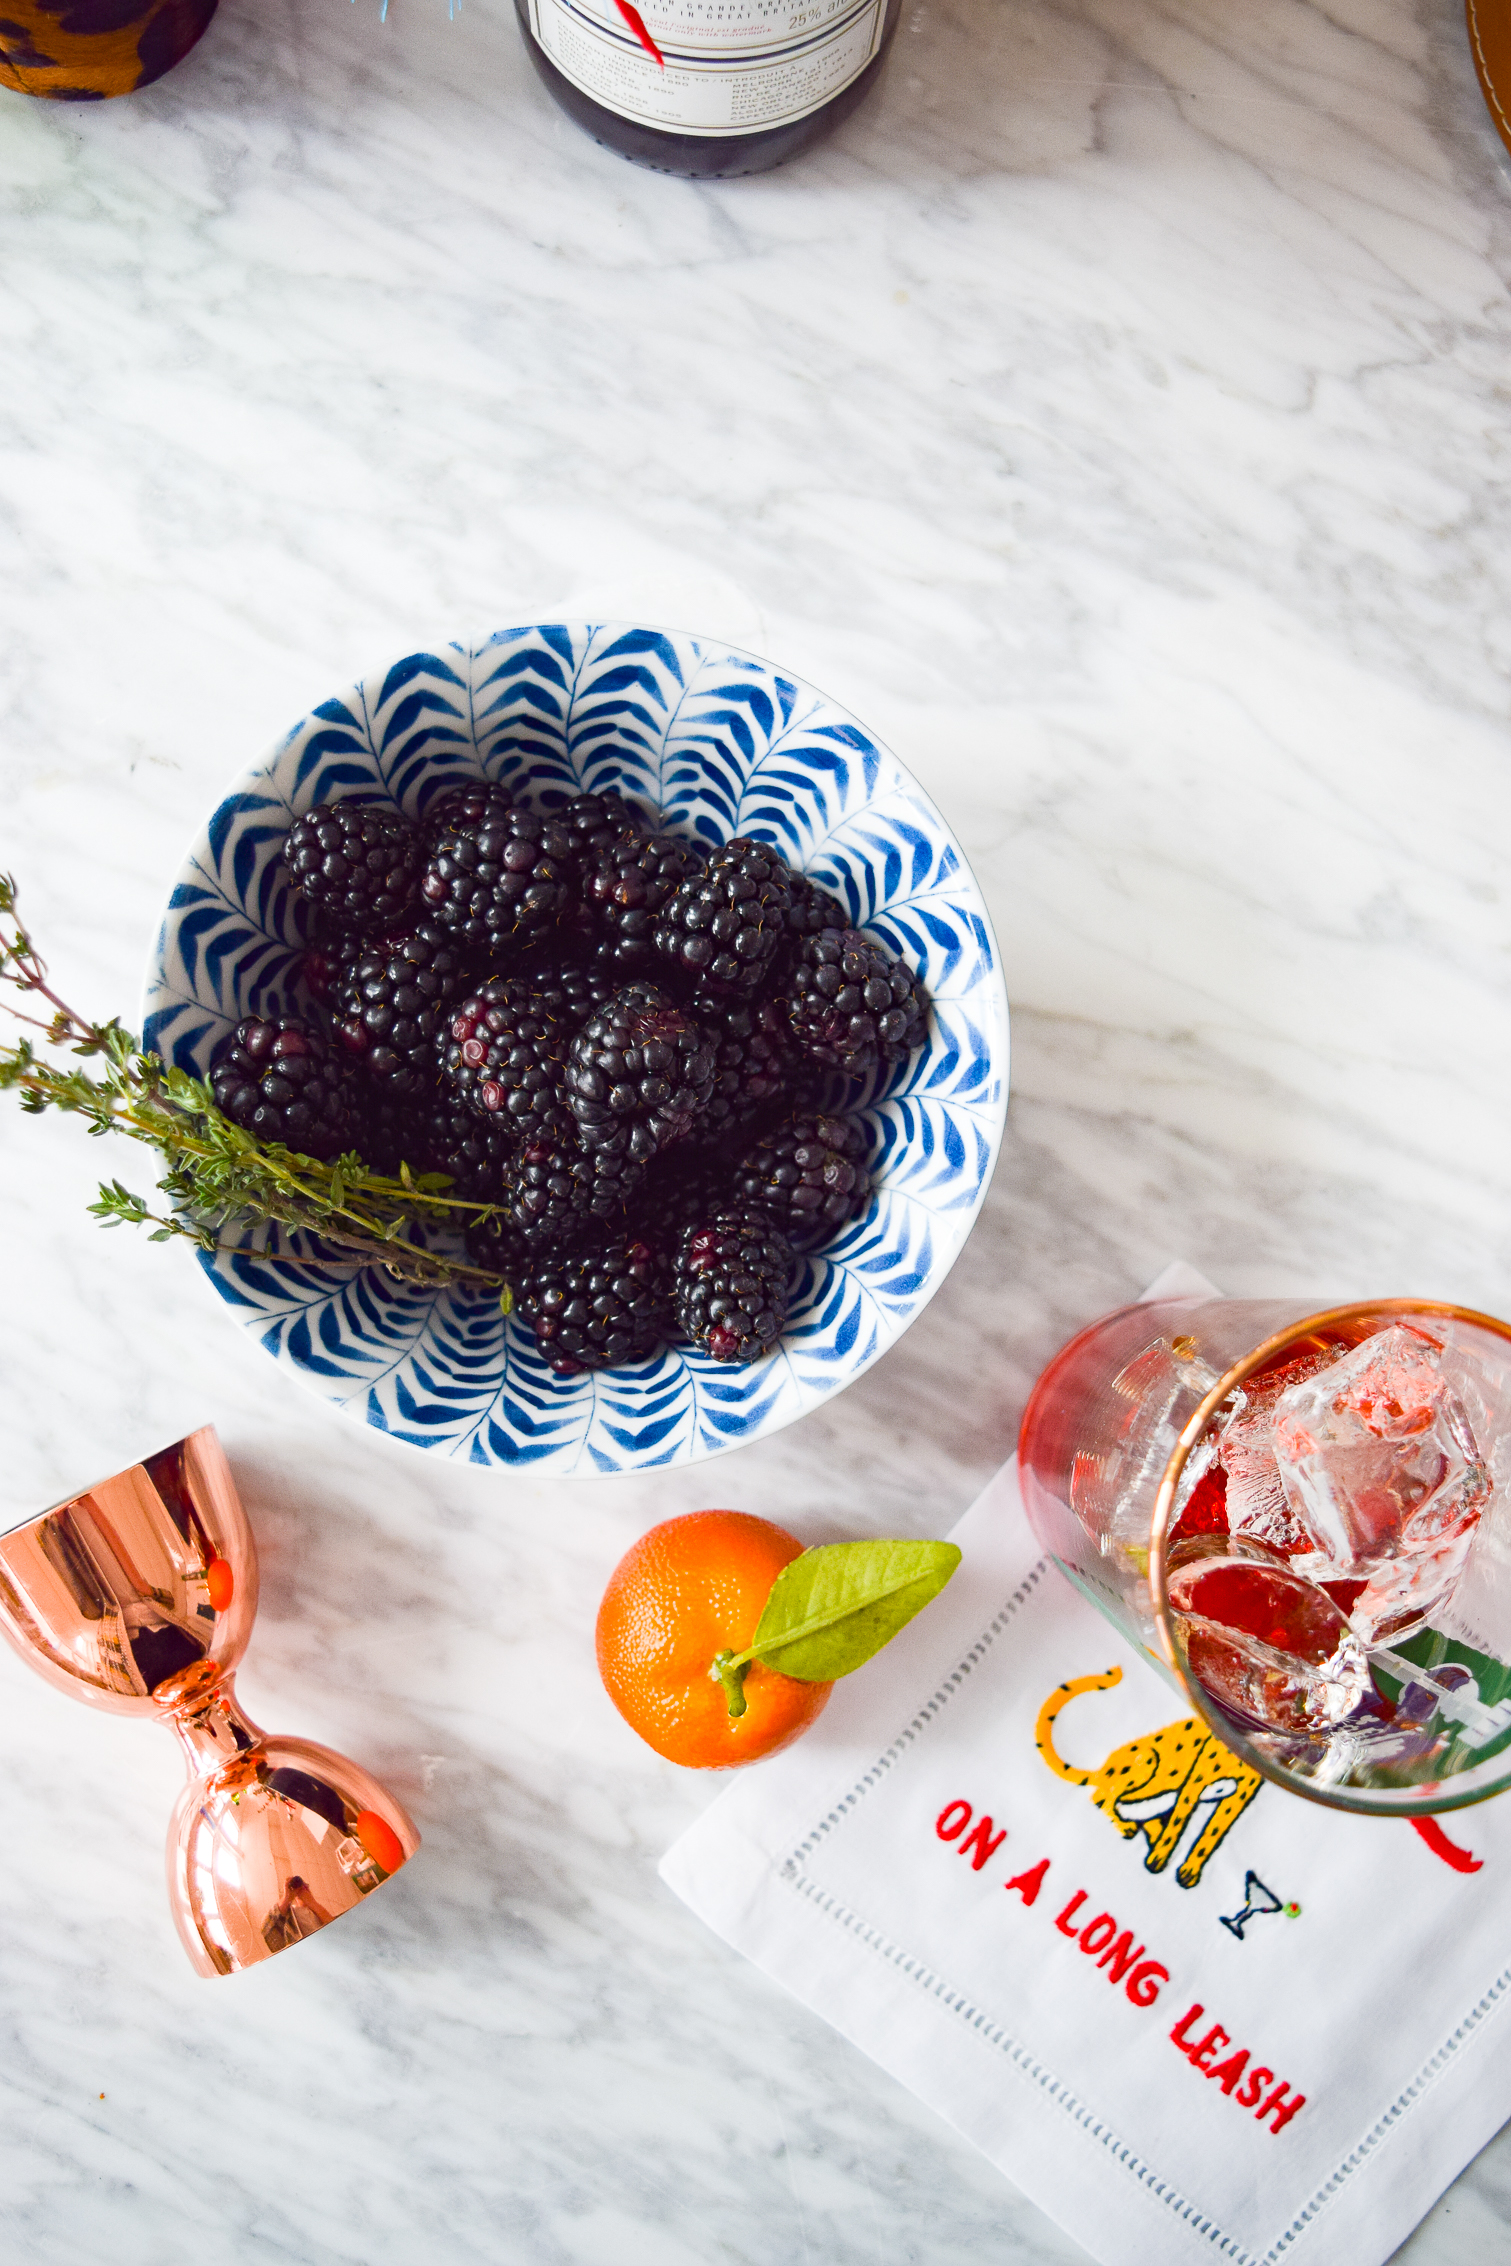 Make yourself a Blackberry & Rosemary Pimms Cup to start you happy hour in style! Their the perfect weekend sip or brunch cocktail. So fresh and tasty!